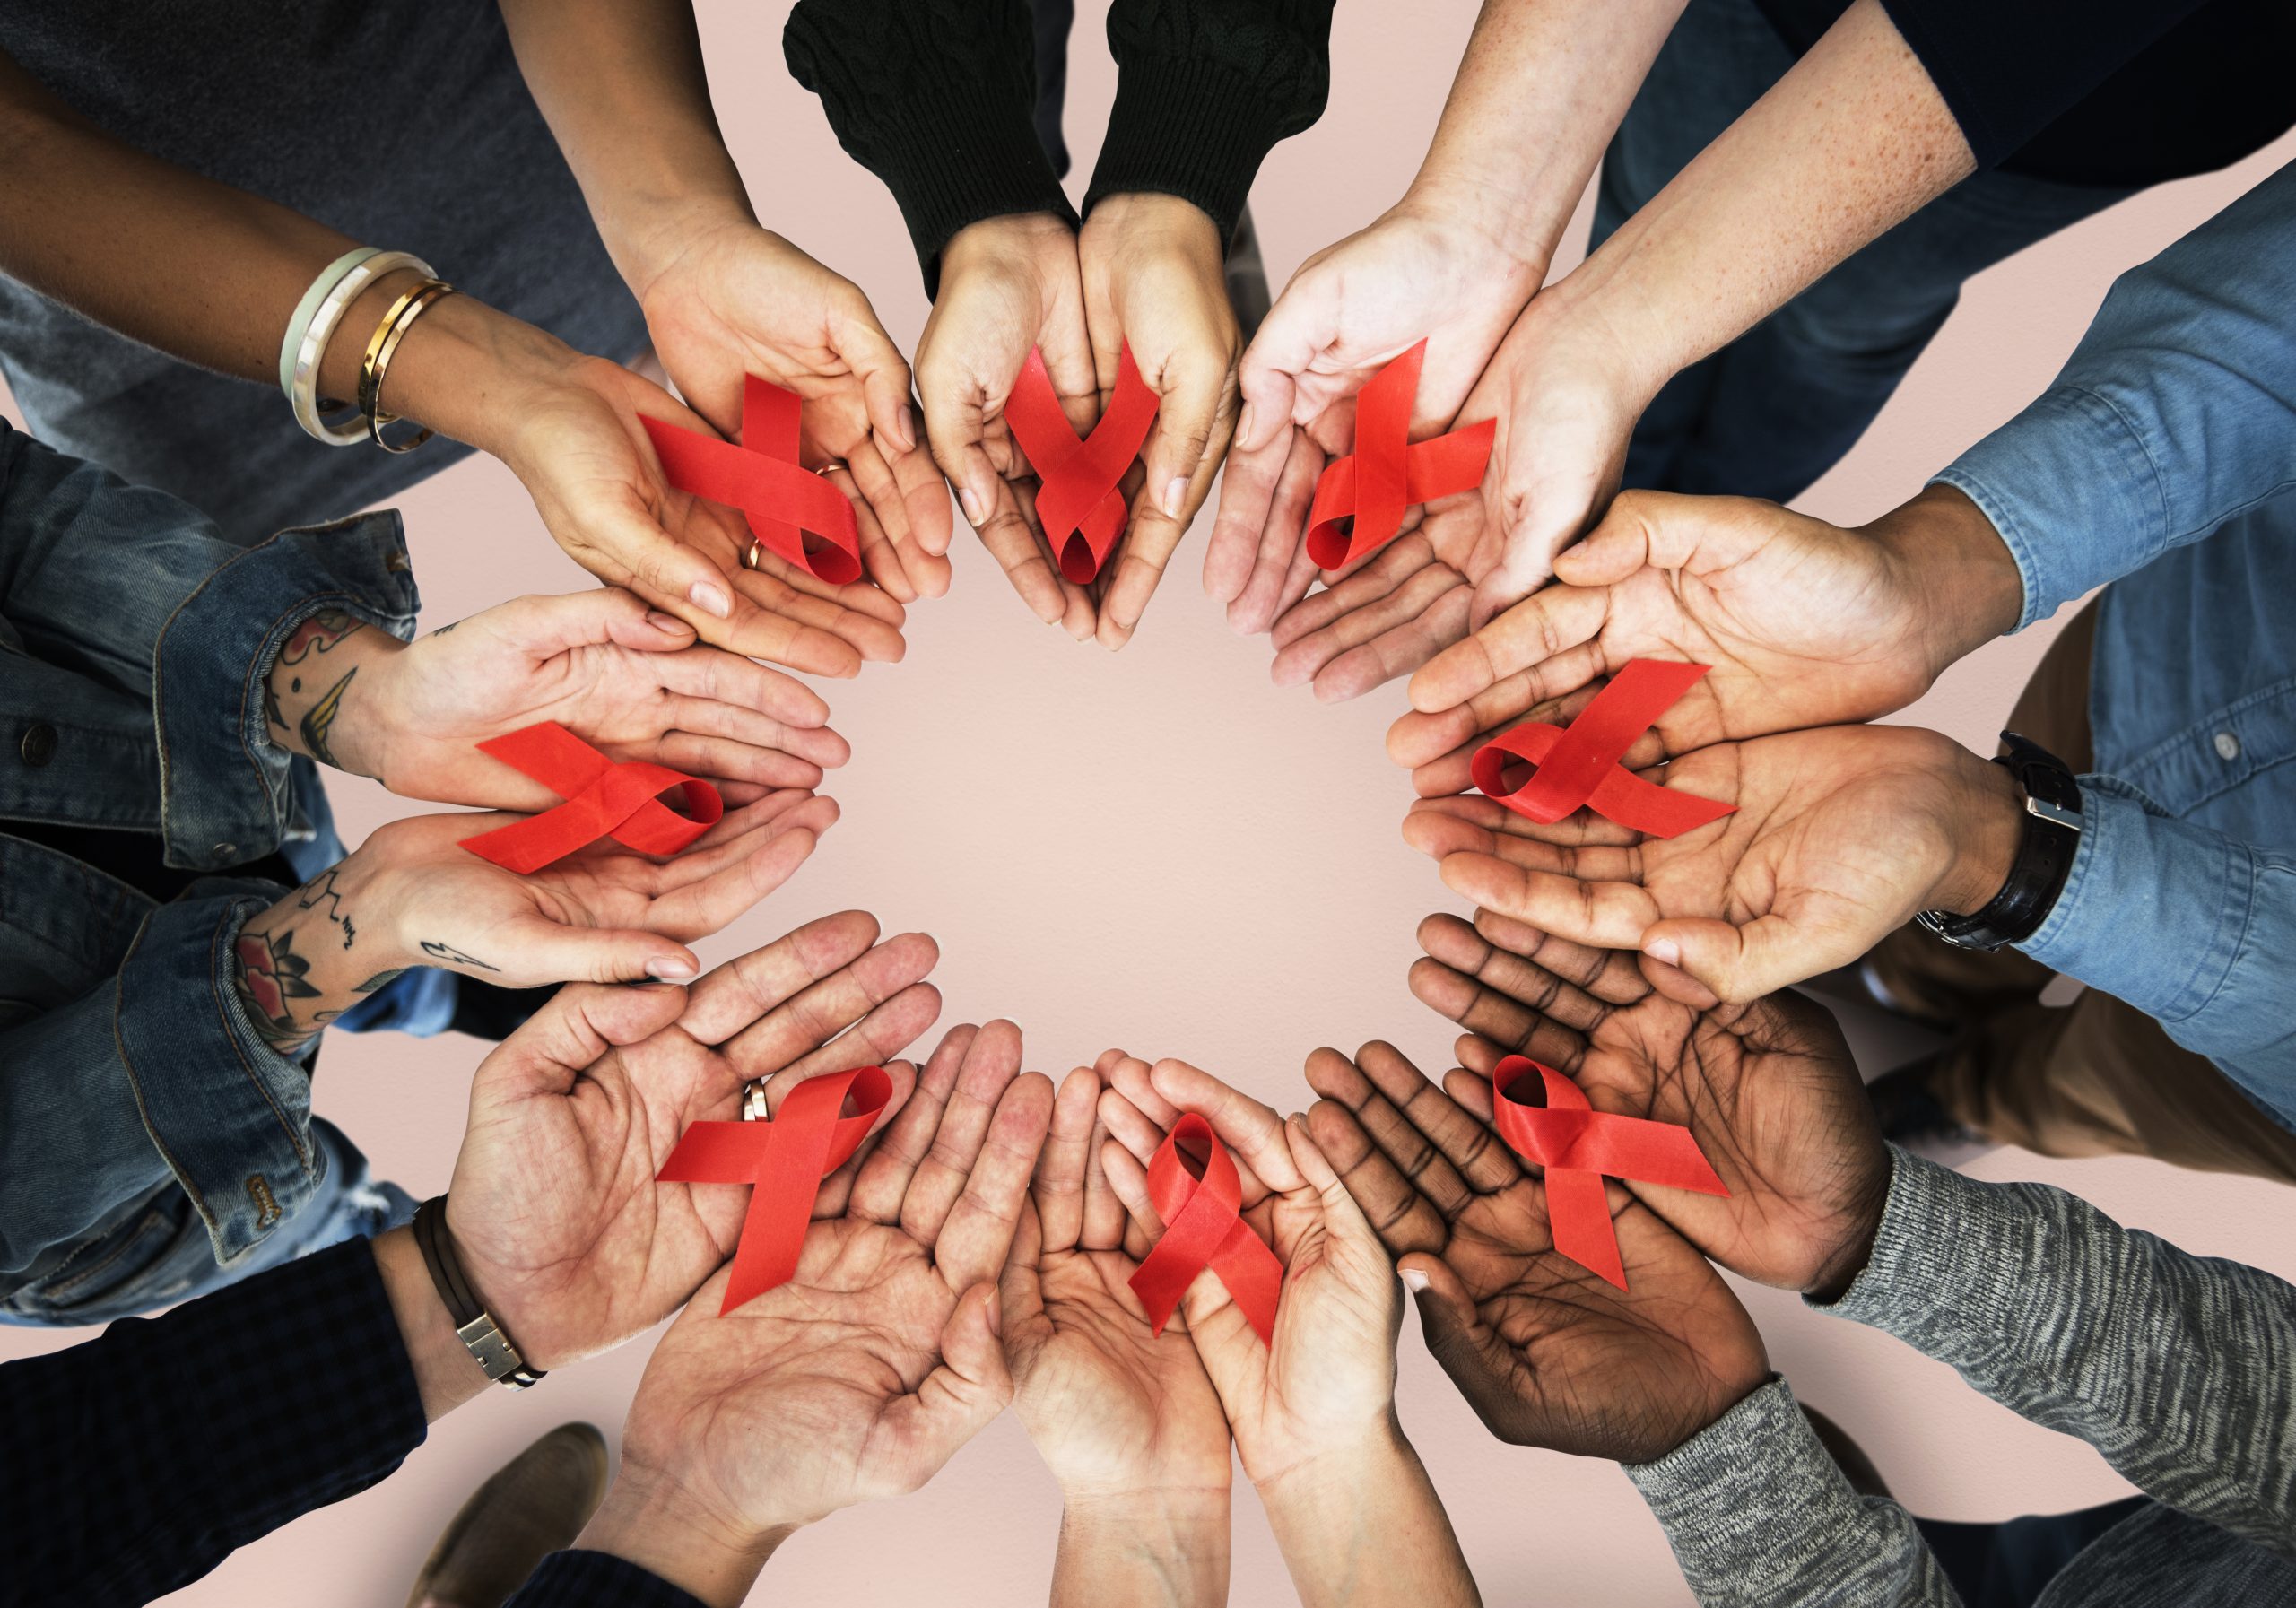 Group,Of,Hands,Holding,Red,Ribbon,Stop,Drugs,And,Hiv/aids